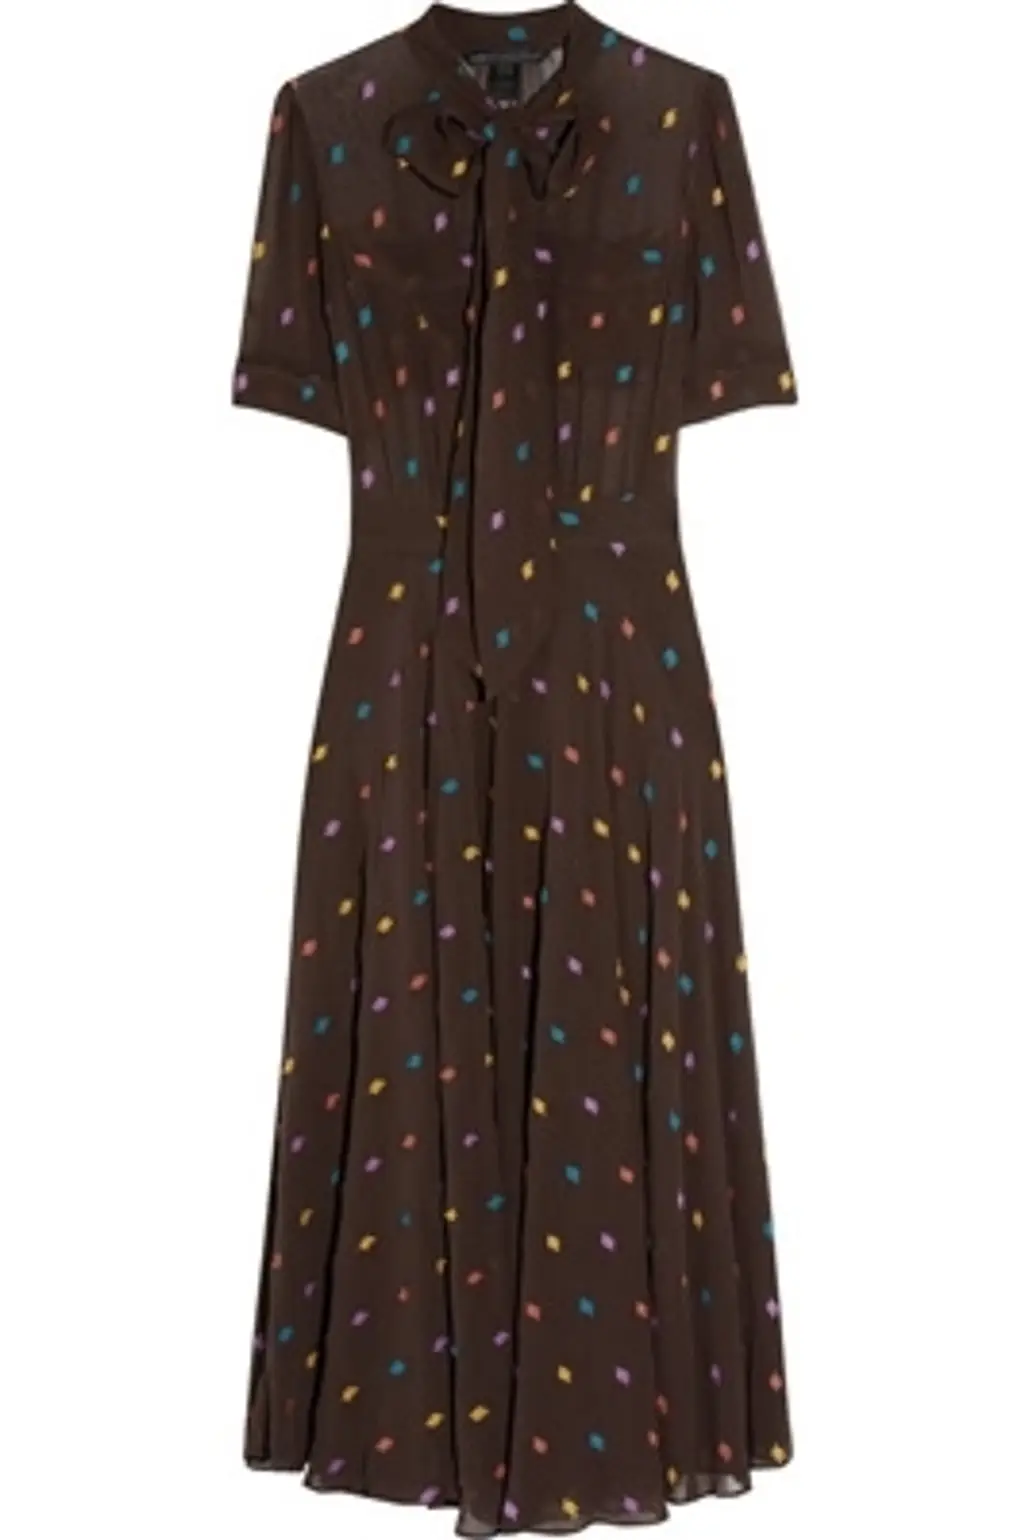 Marc by Marc Jacobs Galena Embroidered Silk-Chiffon Dress